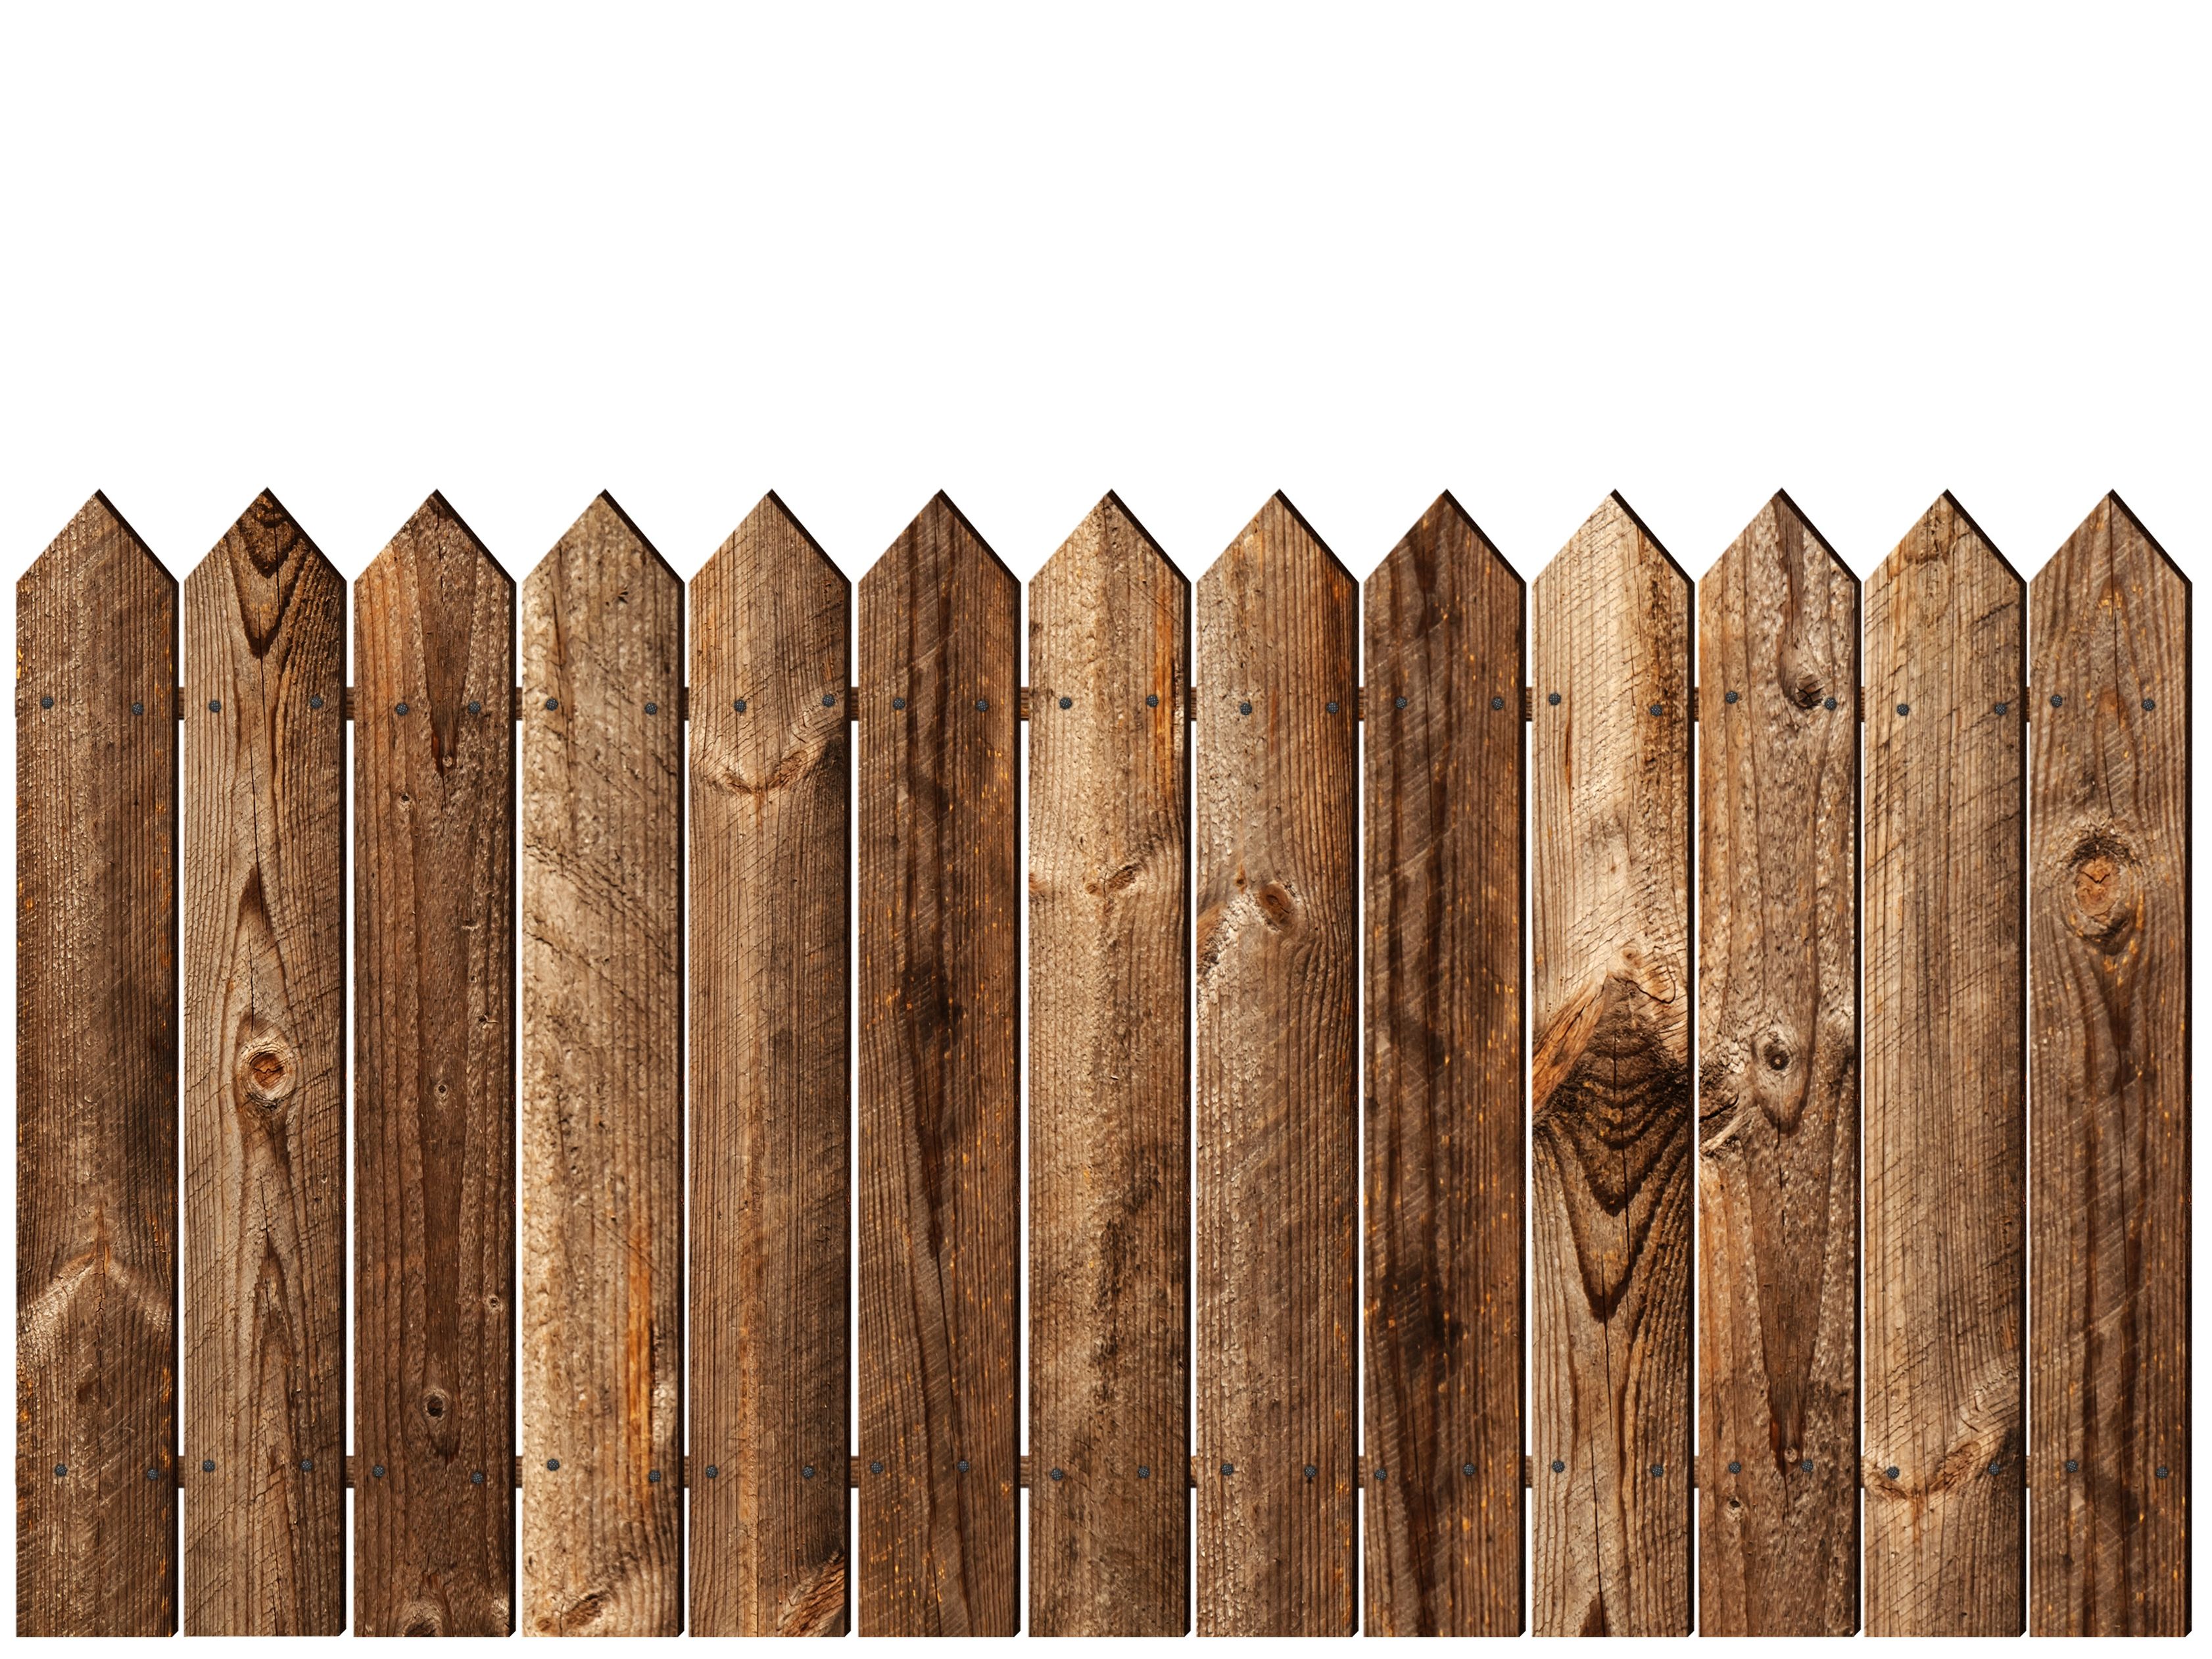 An Important Reason to Make Sure to Choose the Right Fence Company